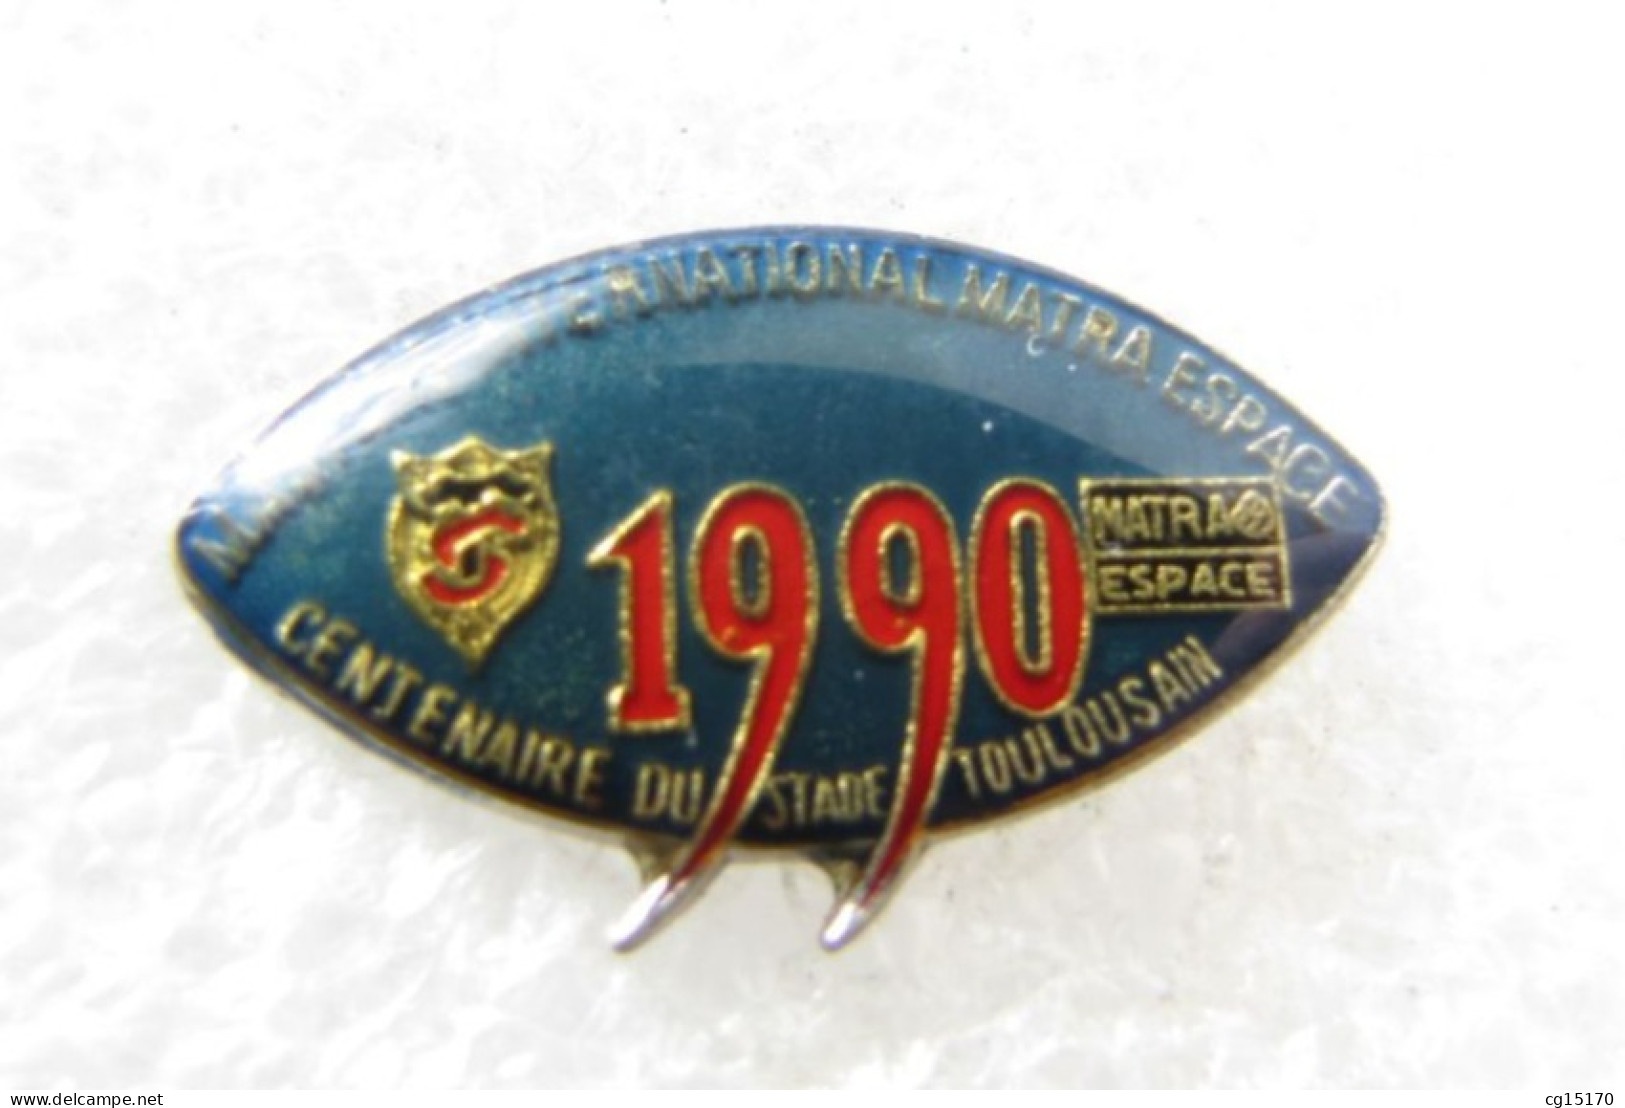 PIN'S    RUGBY 1990  CENTENAIRE DU STADE TOULOUSAIN  MATRA ESPACE - Rugby